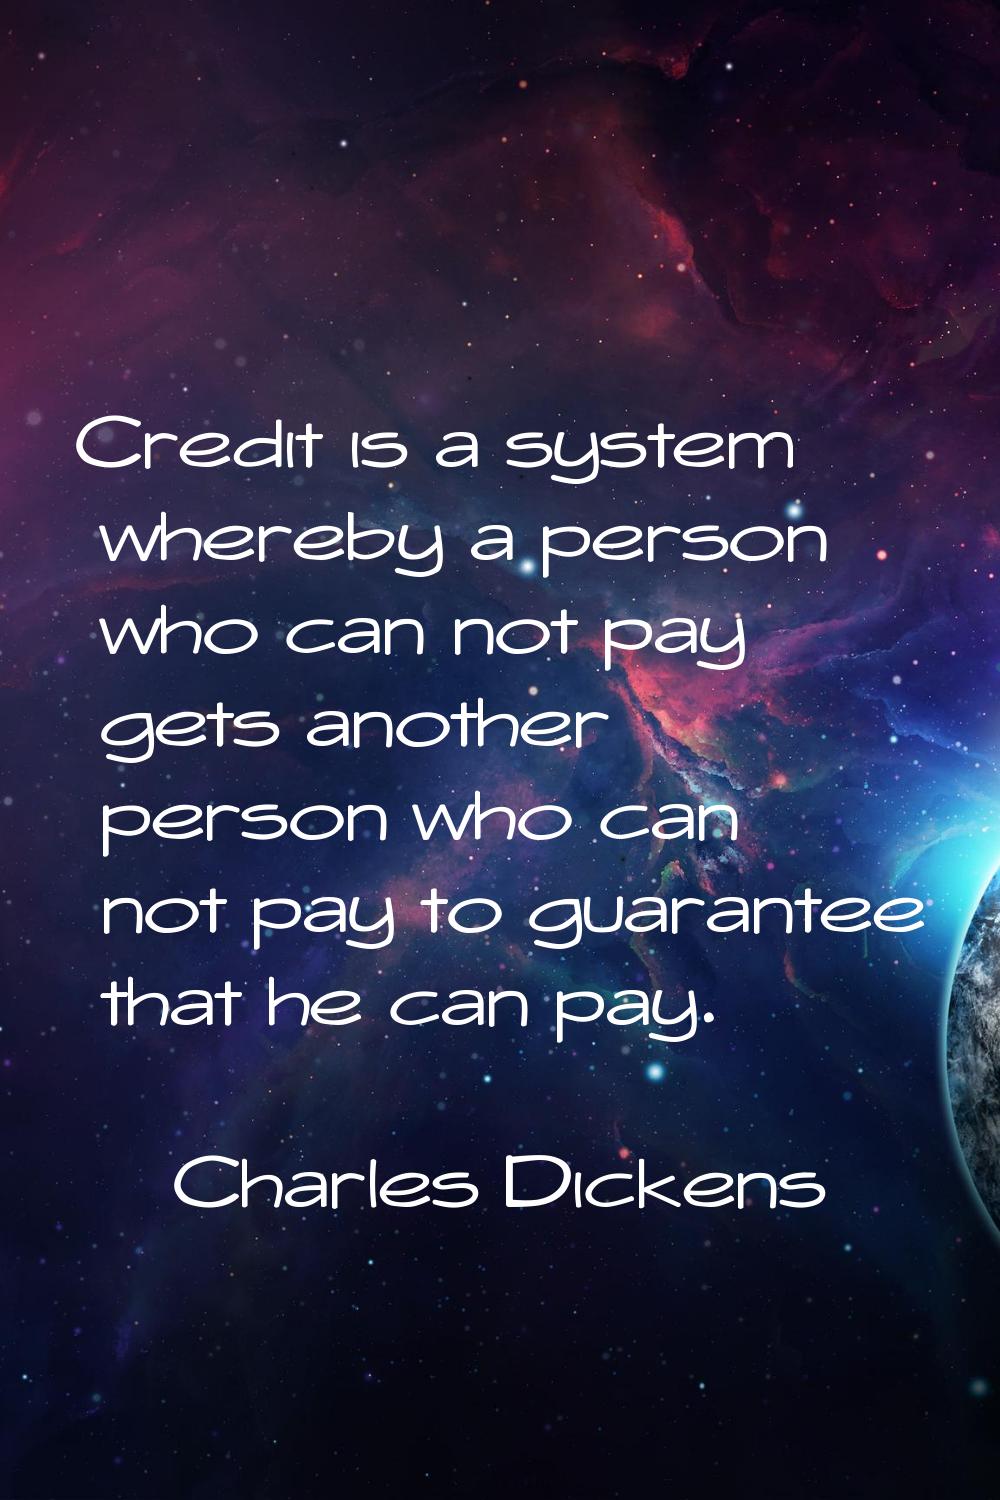 Credit is a system whereby a person who can not pay gets another person who can not pay to guarante